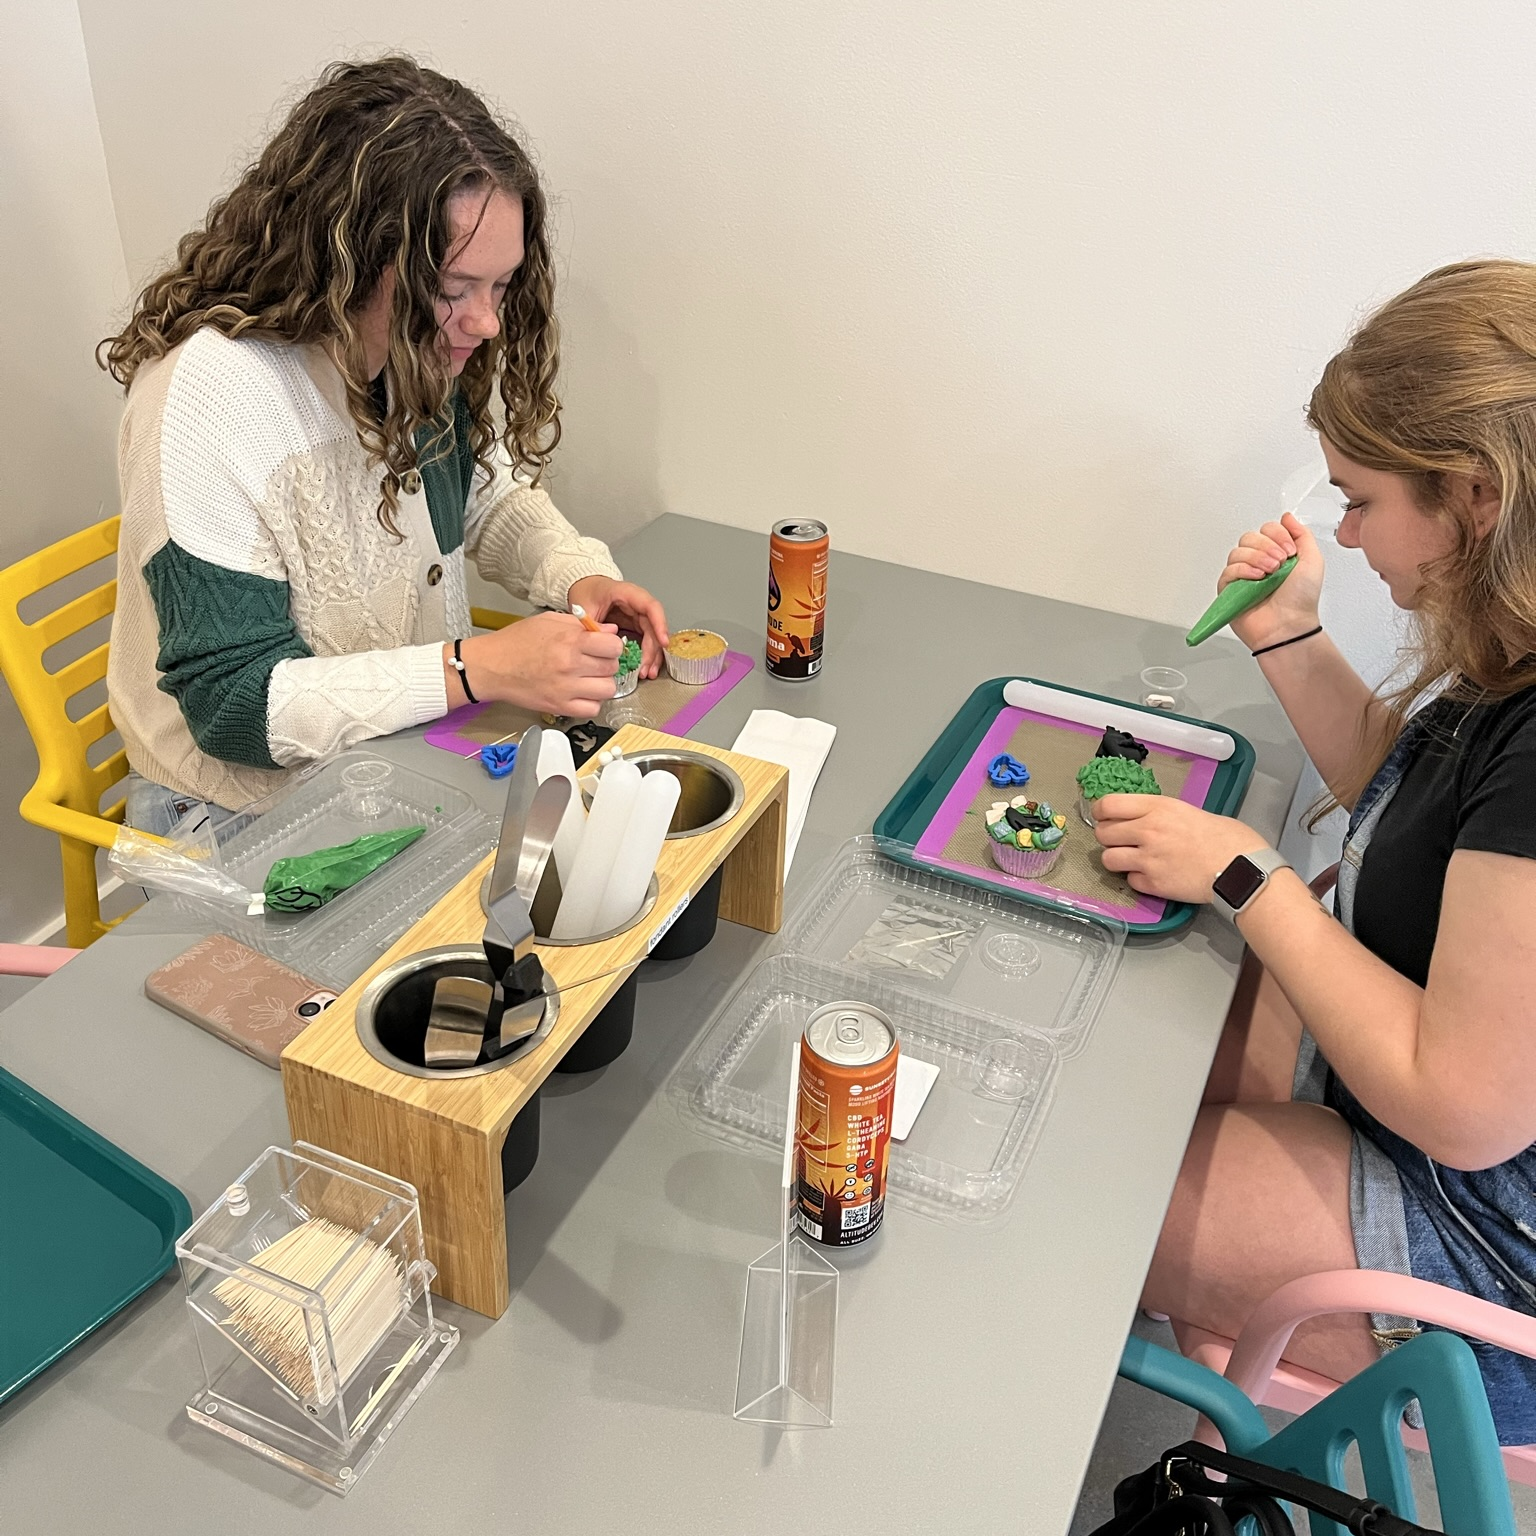 two young ladies decorate cupcakes with frosting and tools, while sipping a canned beverage